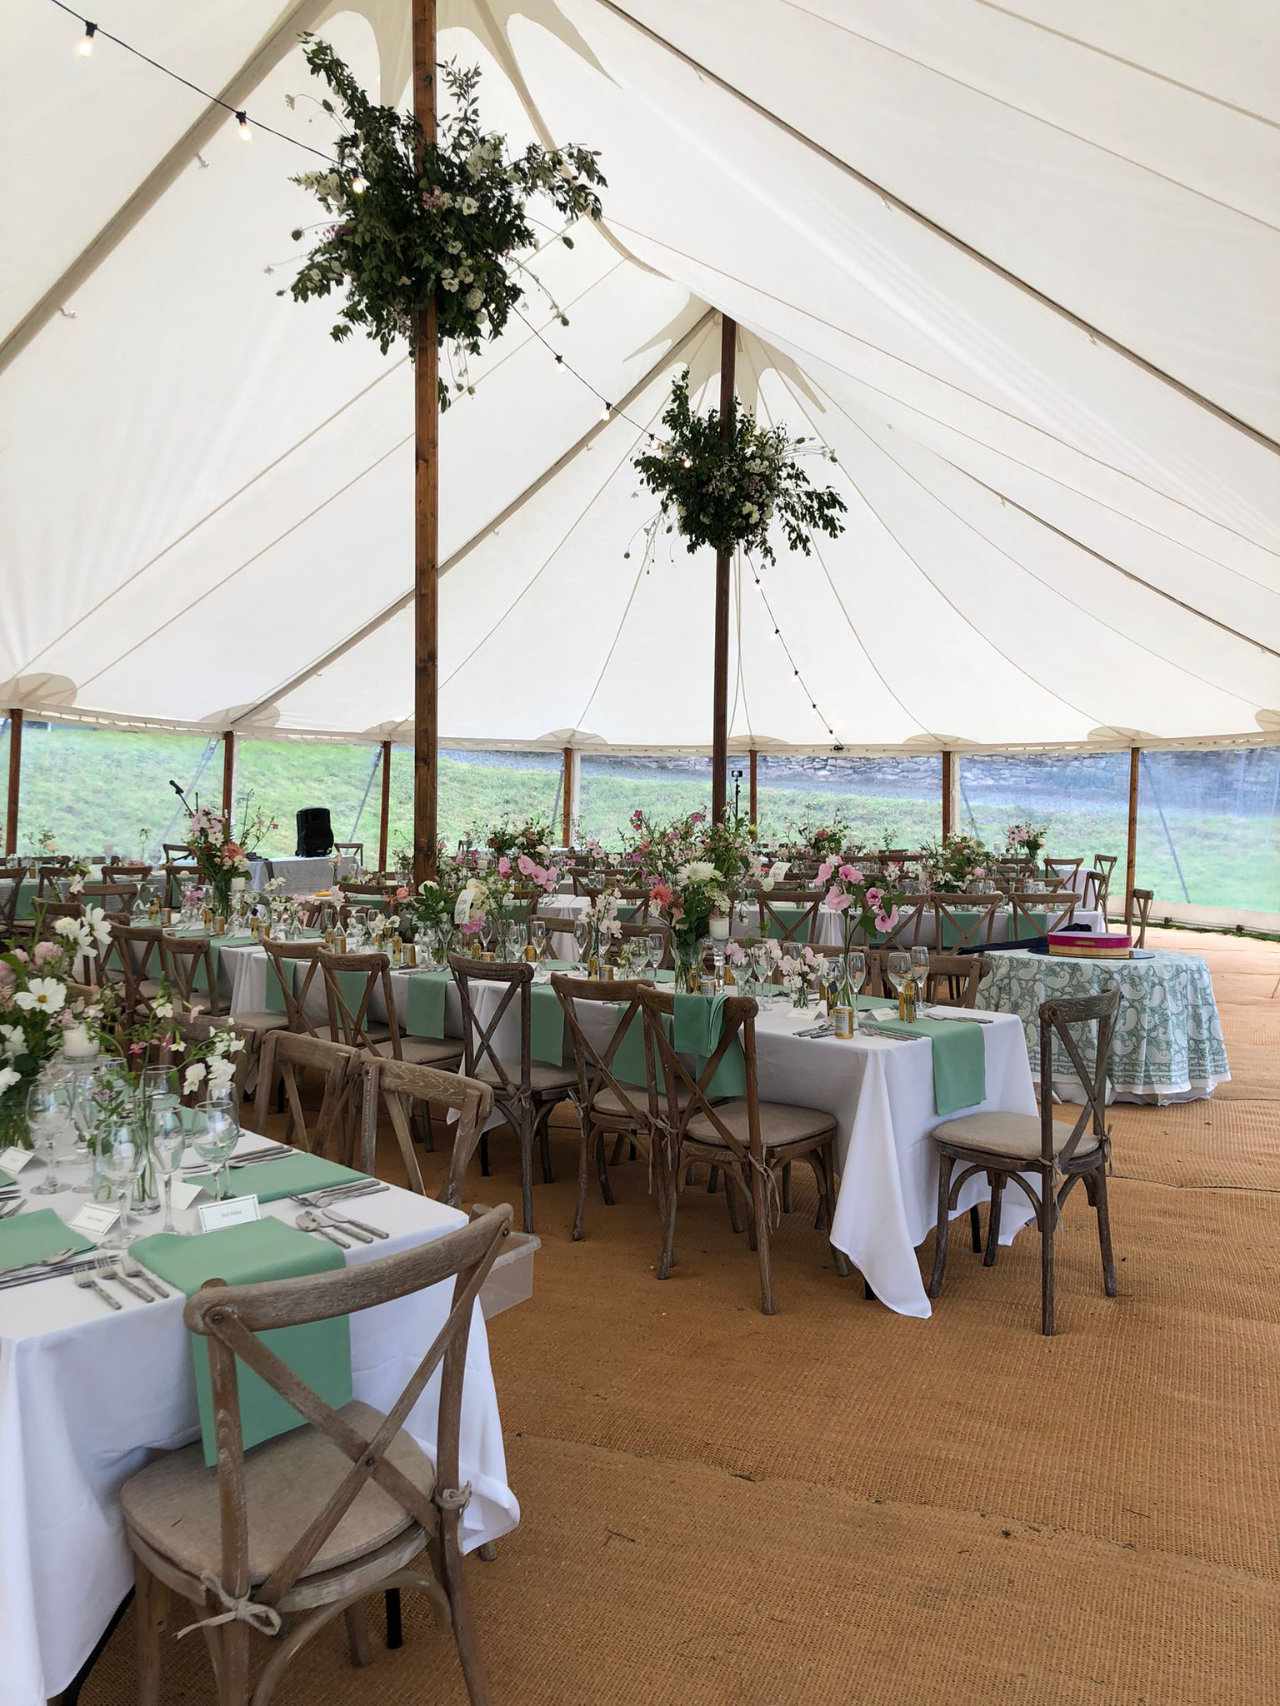 Marquee wedding fully decorated with flowers